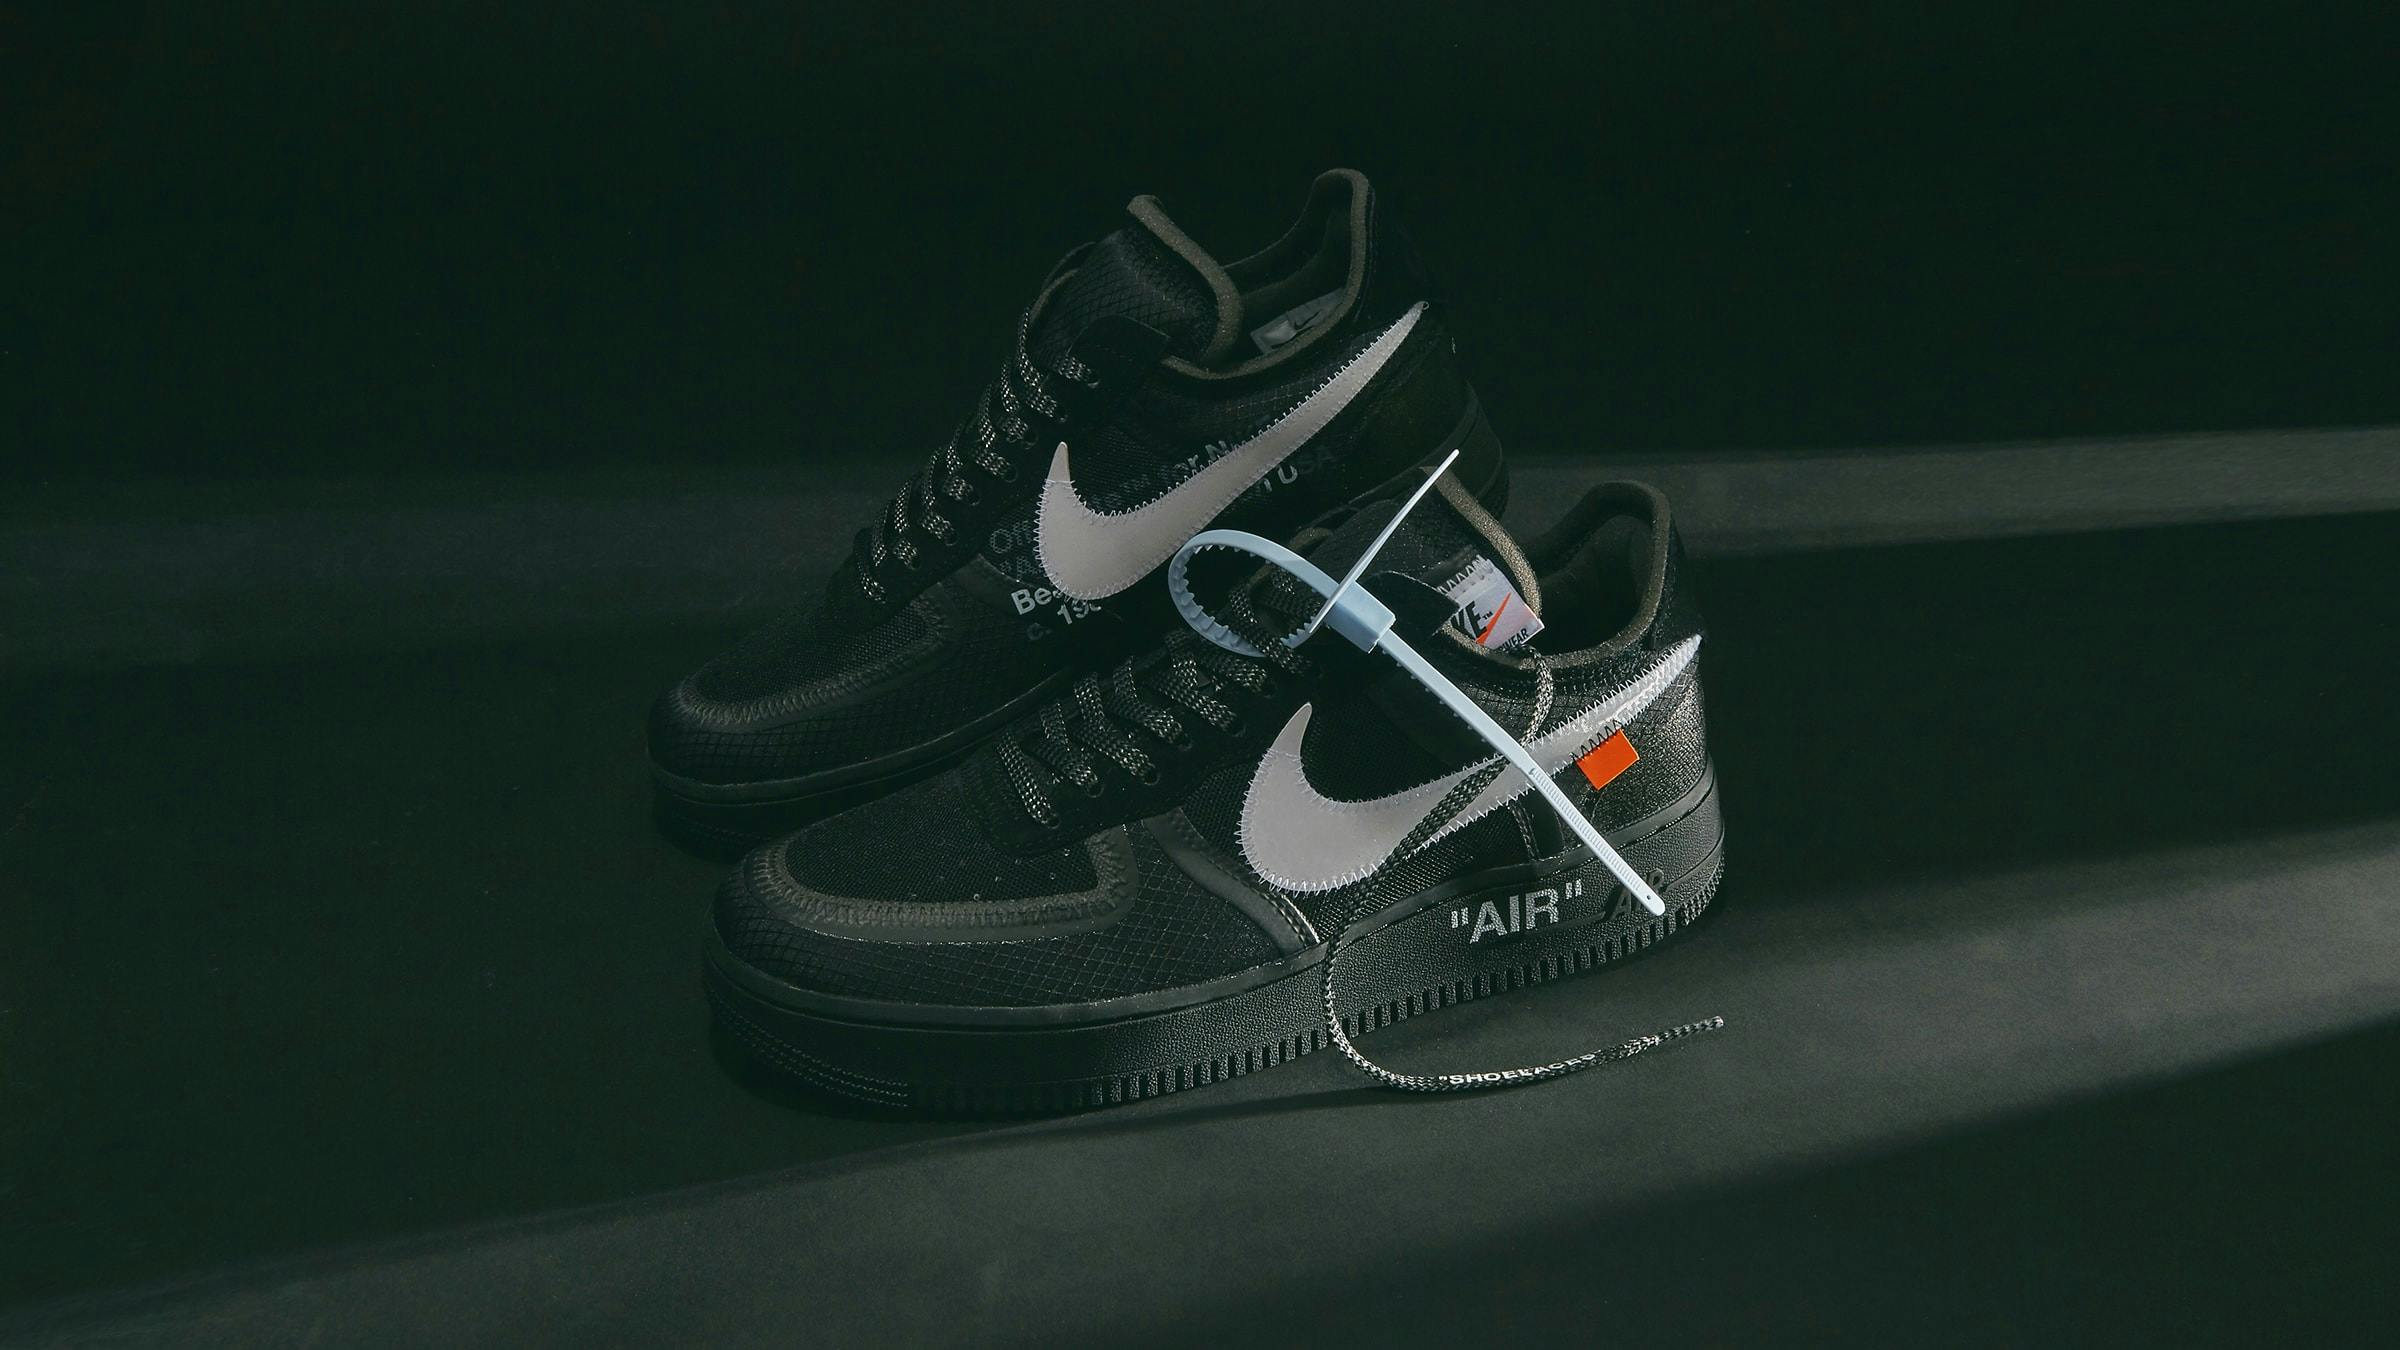 The Ten Re-Issues: Nike x Virgil Abloh Air Force 1 'Black' and 'Volt' -  Register Now on END. Launches